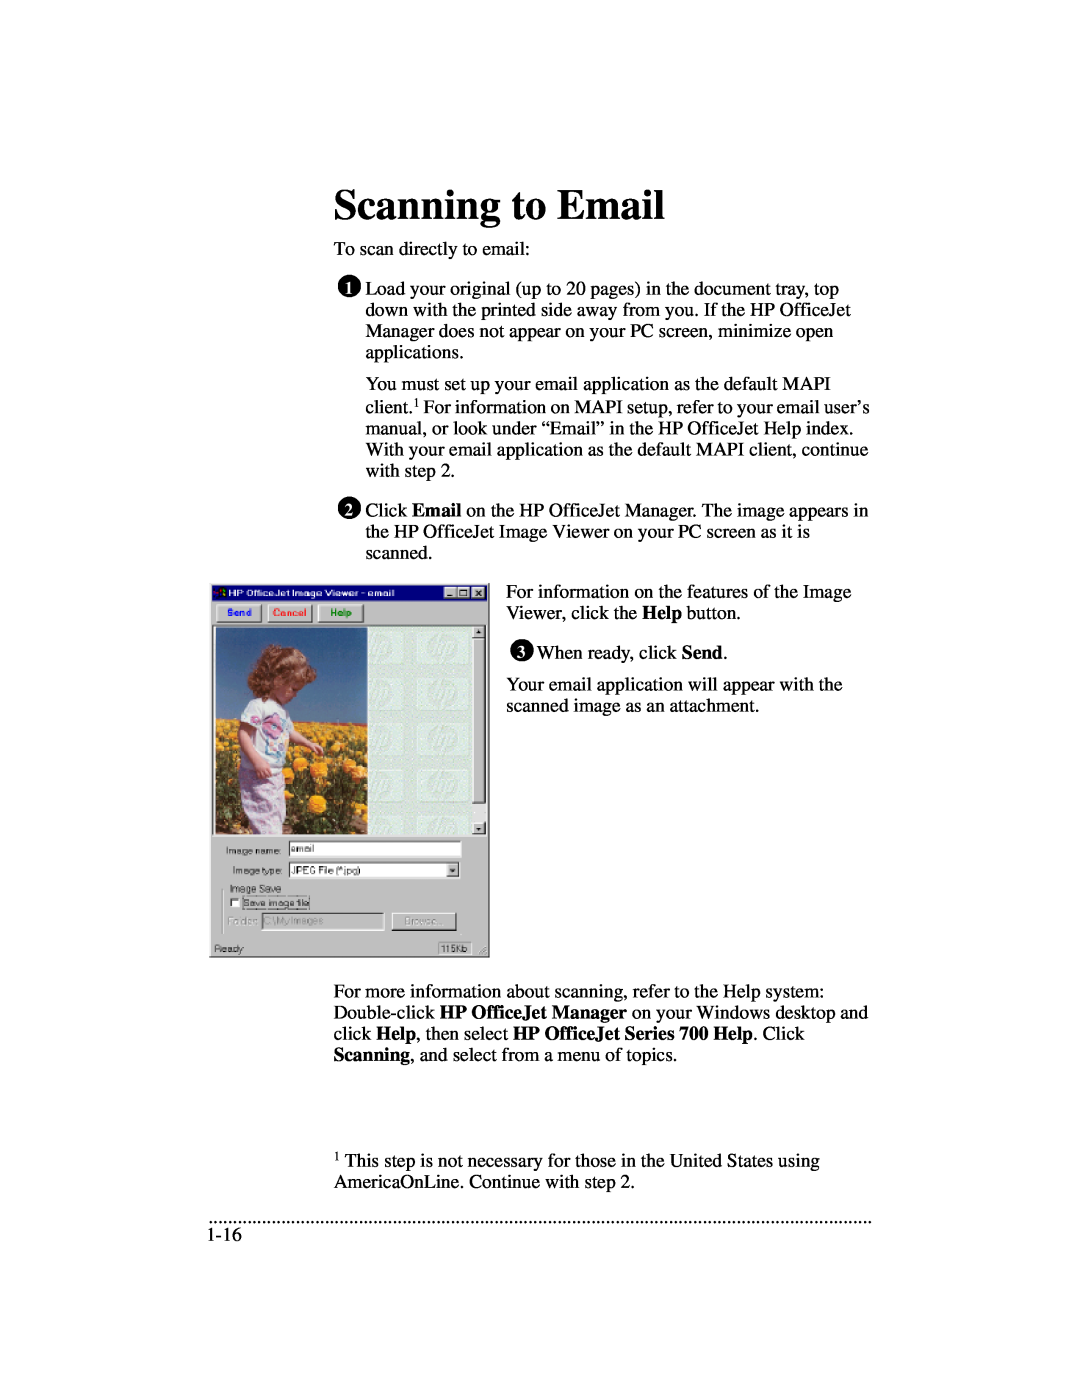 HP 700 manual Scanning to Email 